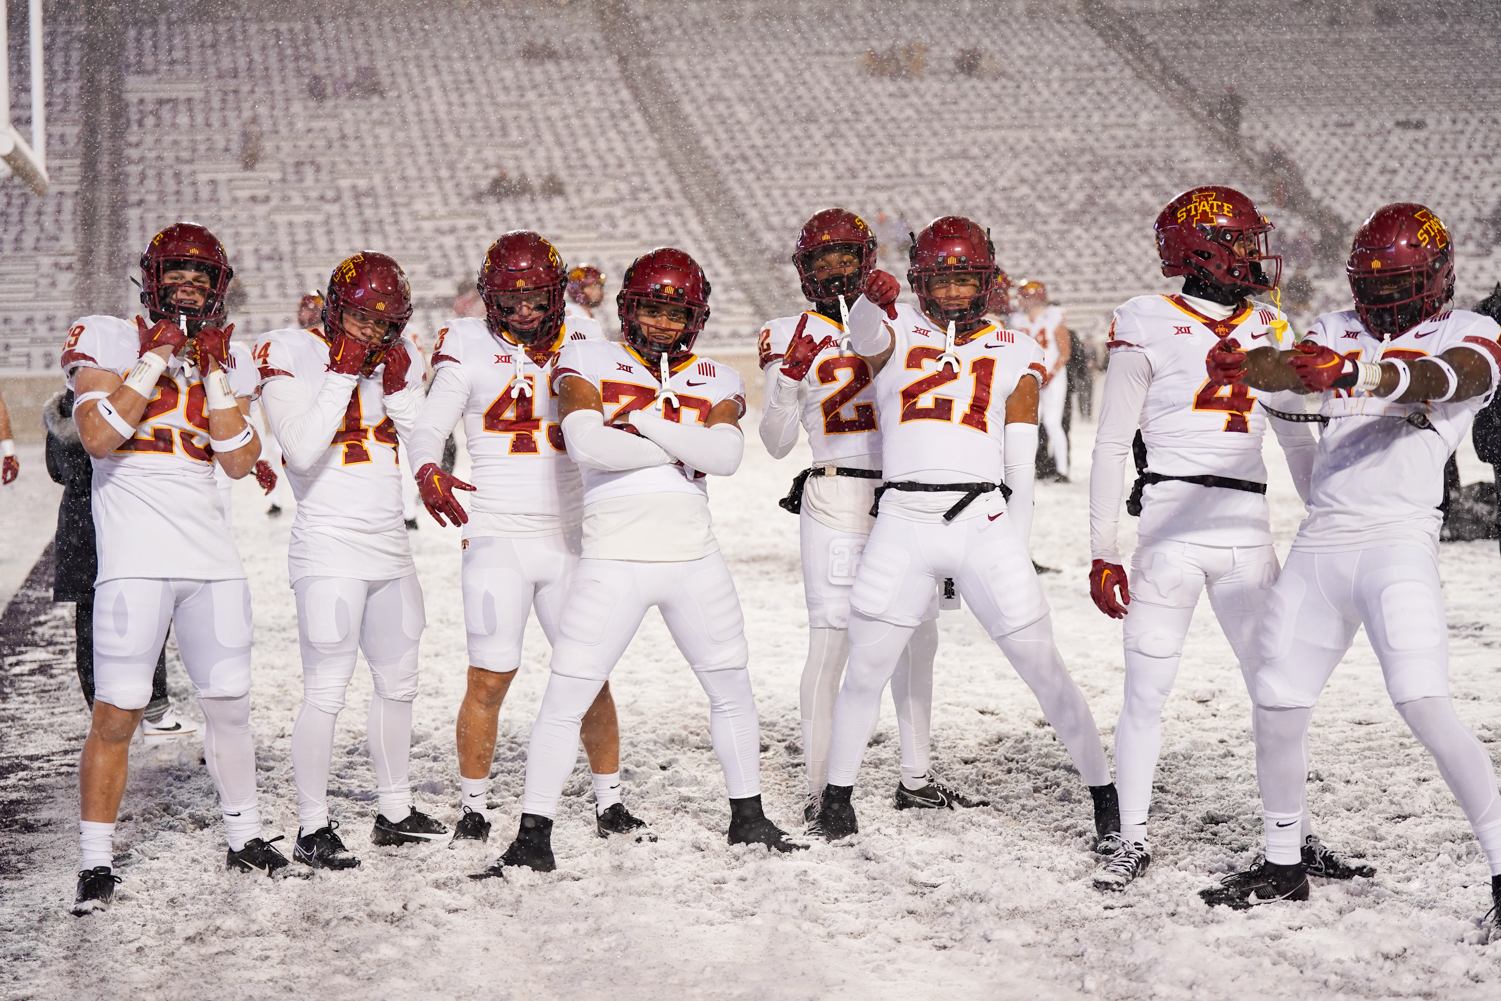 A group of Iowa State defensive backs poses for a photo during warmups at the Iowa State vs. Kansas State football game at Bill Snyder Family Stadium on Nov. 25, 2023 in Manhattan, KS.